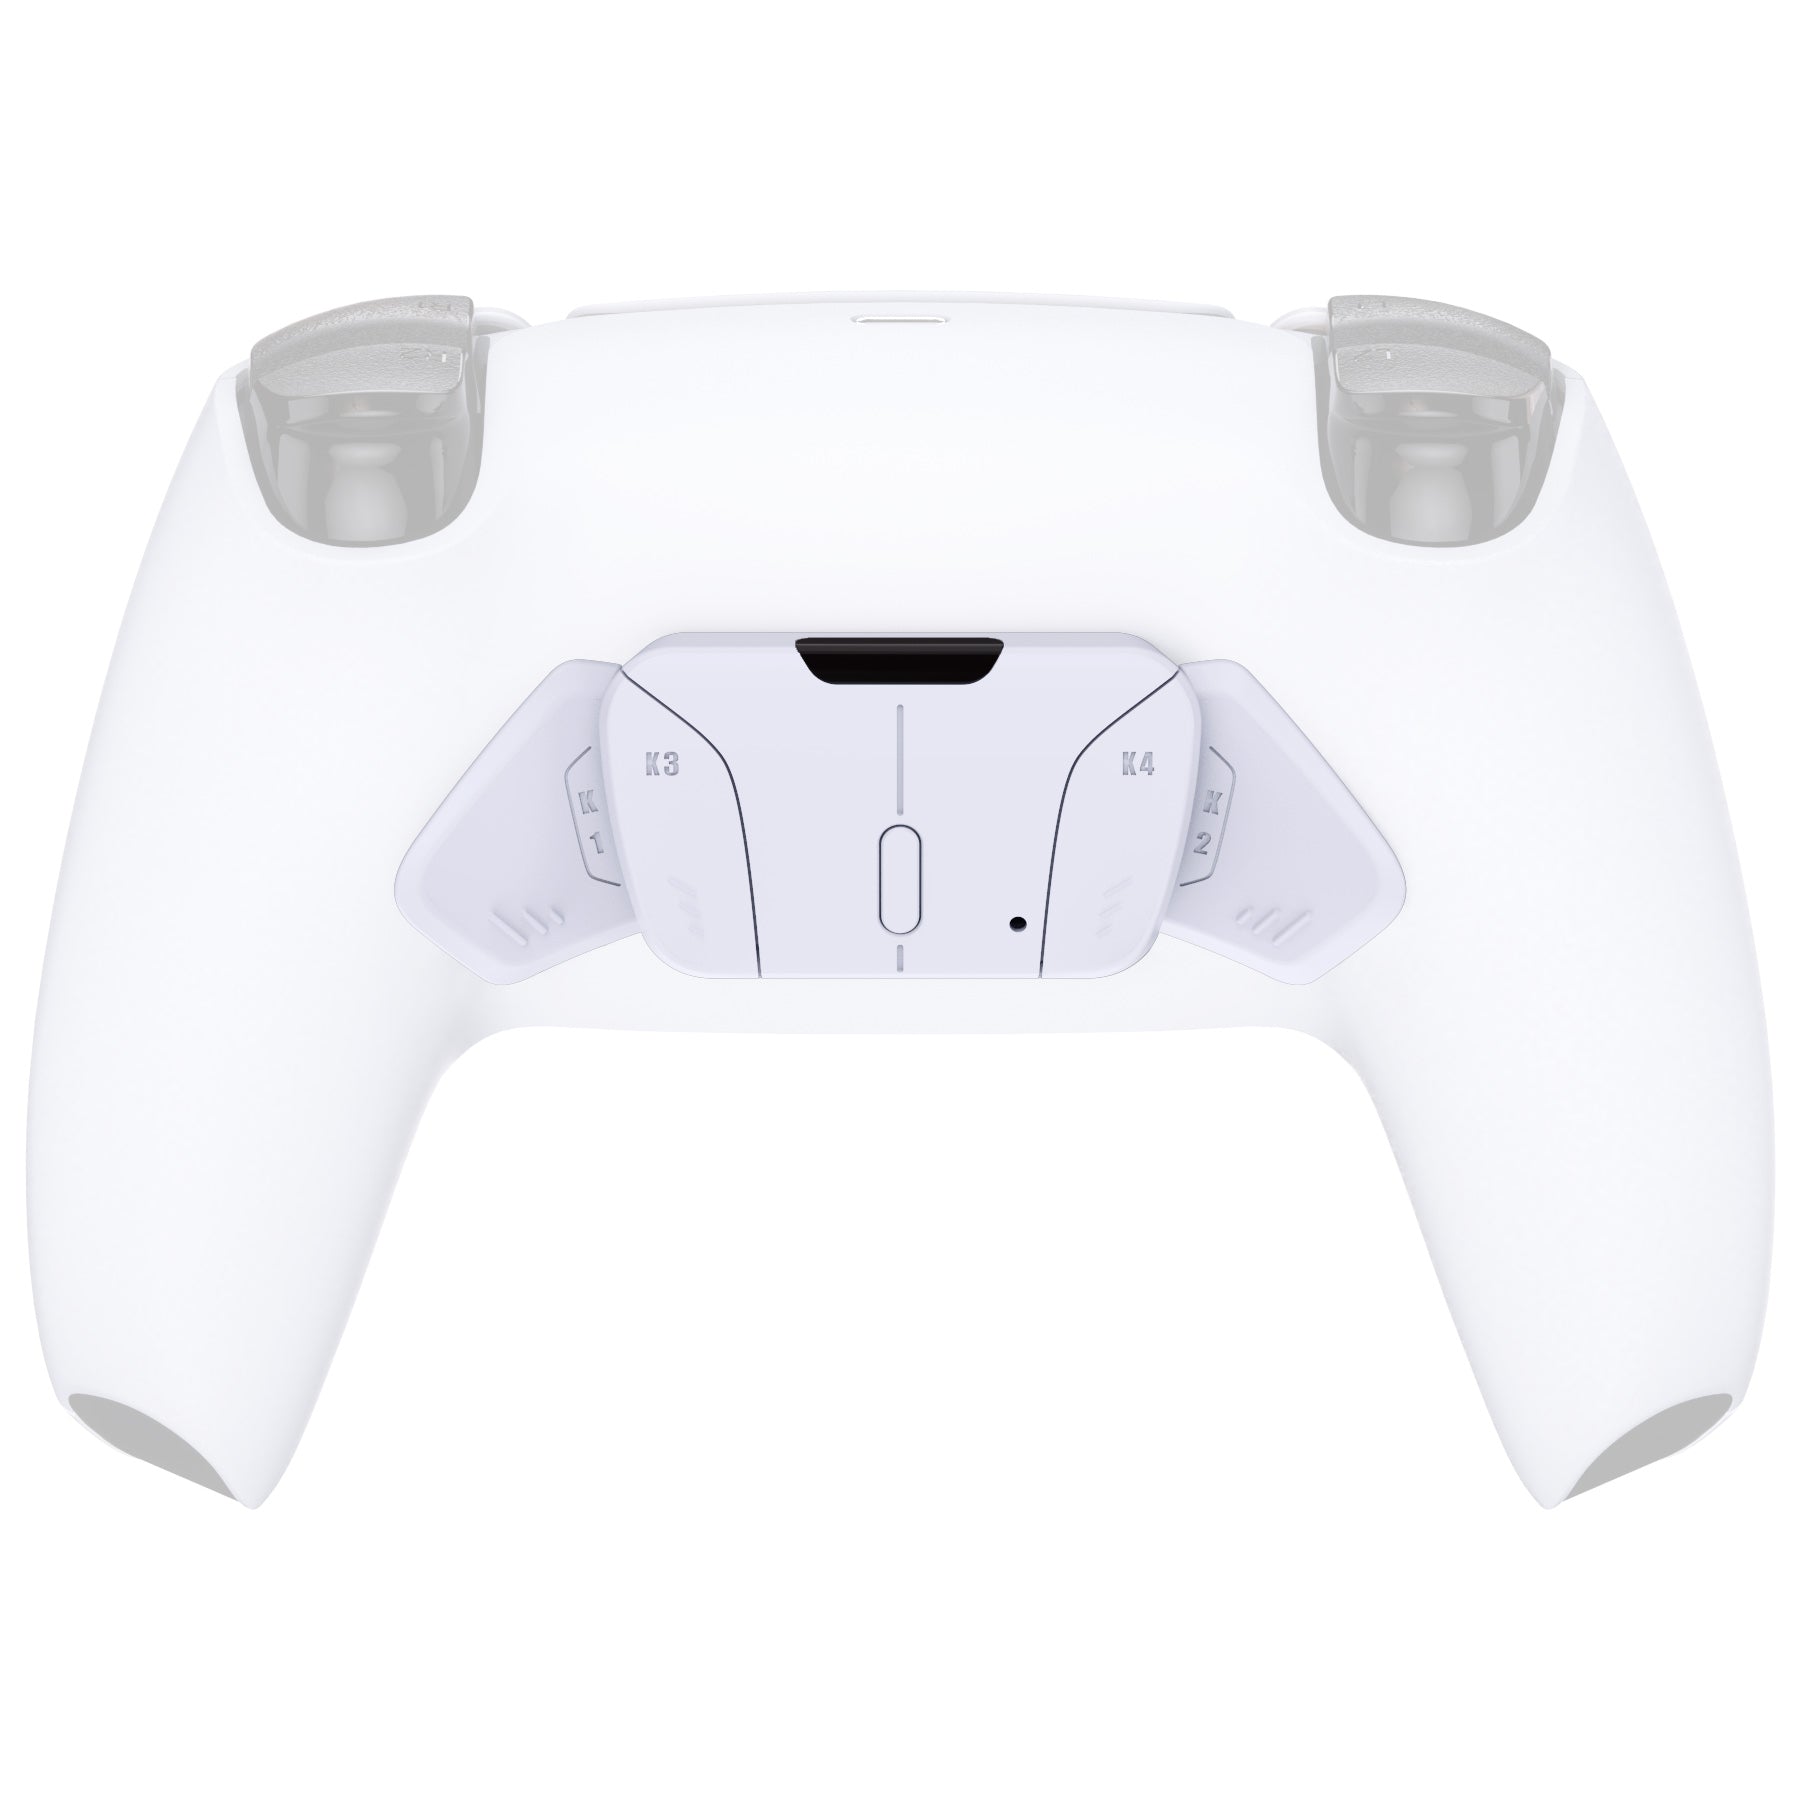 eXtremeRate Retail Solid White Replacement Redesigned K1 K2 K3 K4 Back Buttons Housing Shell for ps5 Controller eXtremeRate RISE4 Remap Kit - Controller & RISE4 Remap Board NOT Included - VPFM5002